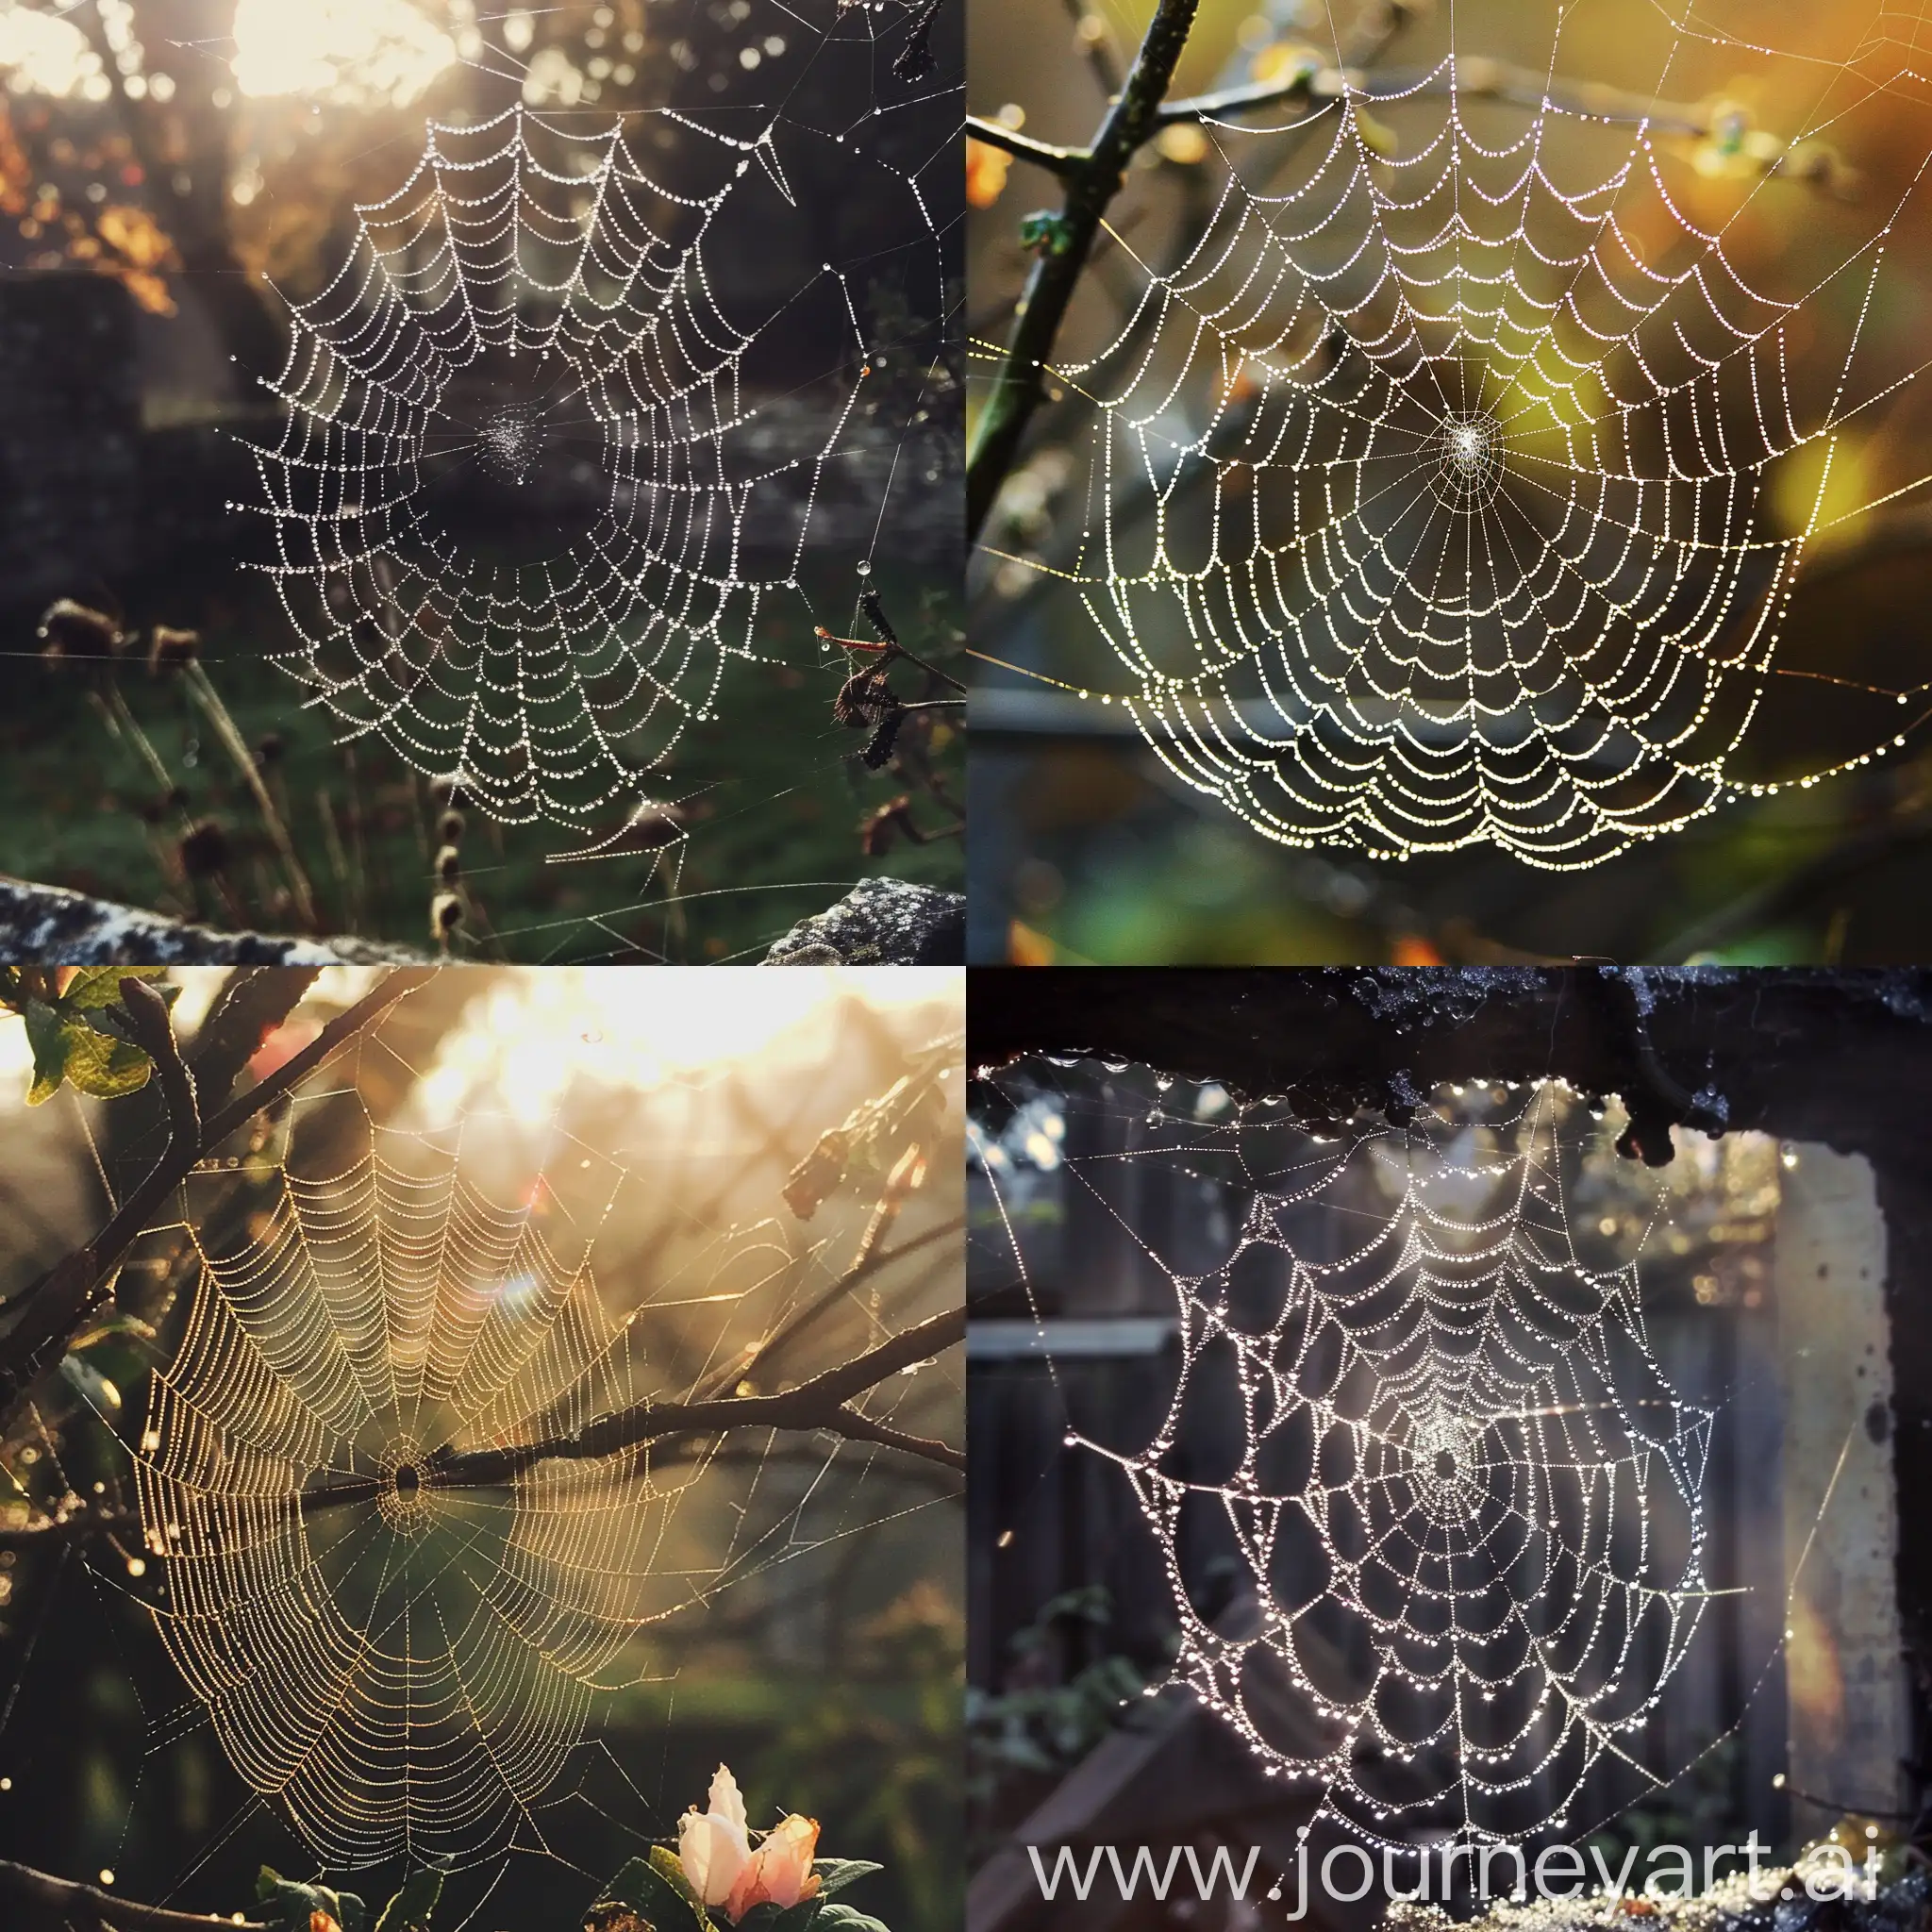 Intricate-Spider-Web-Beauty-A-Captivating-Natural-Masterpiece